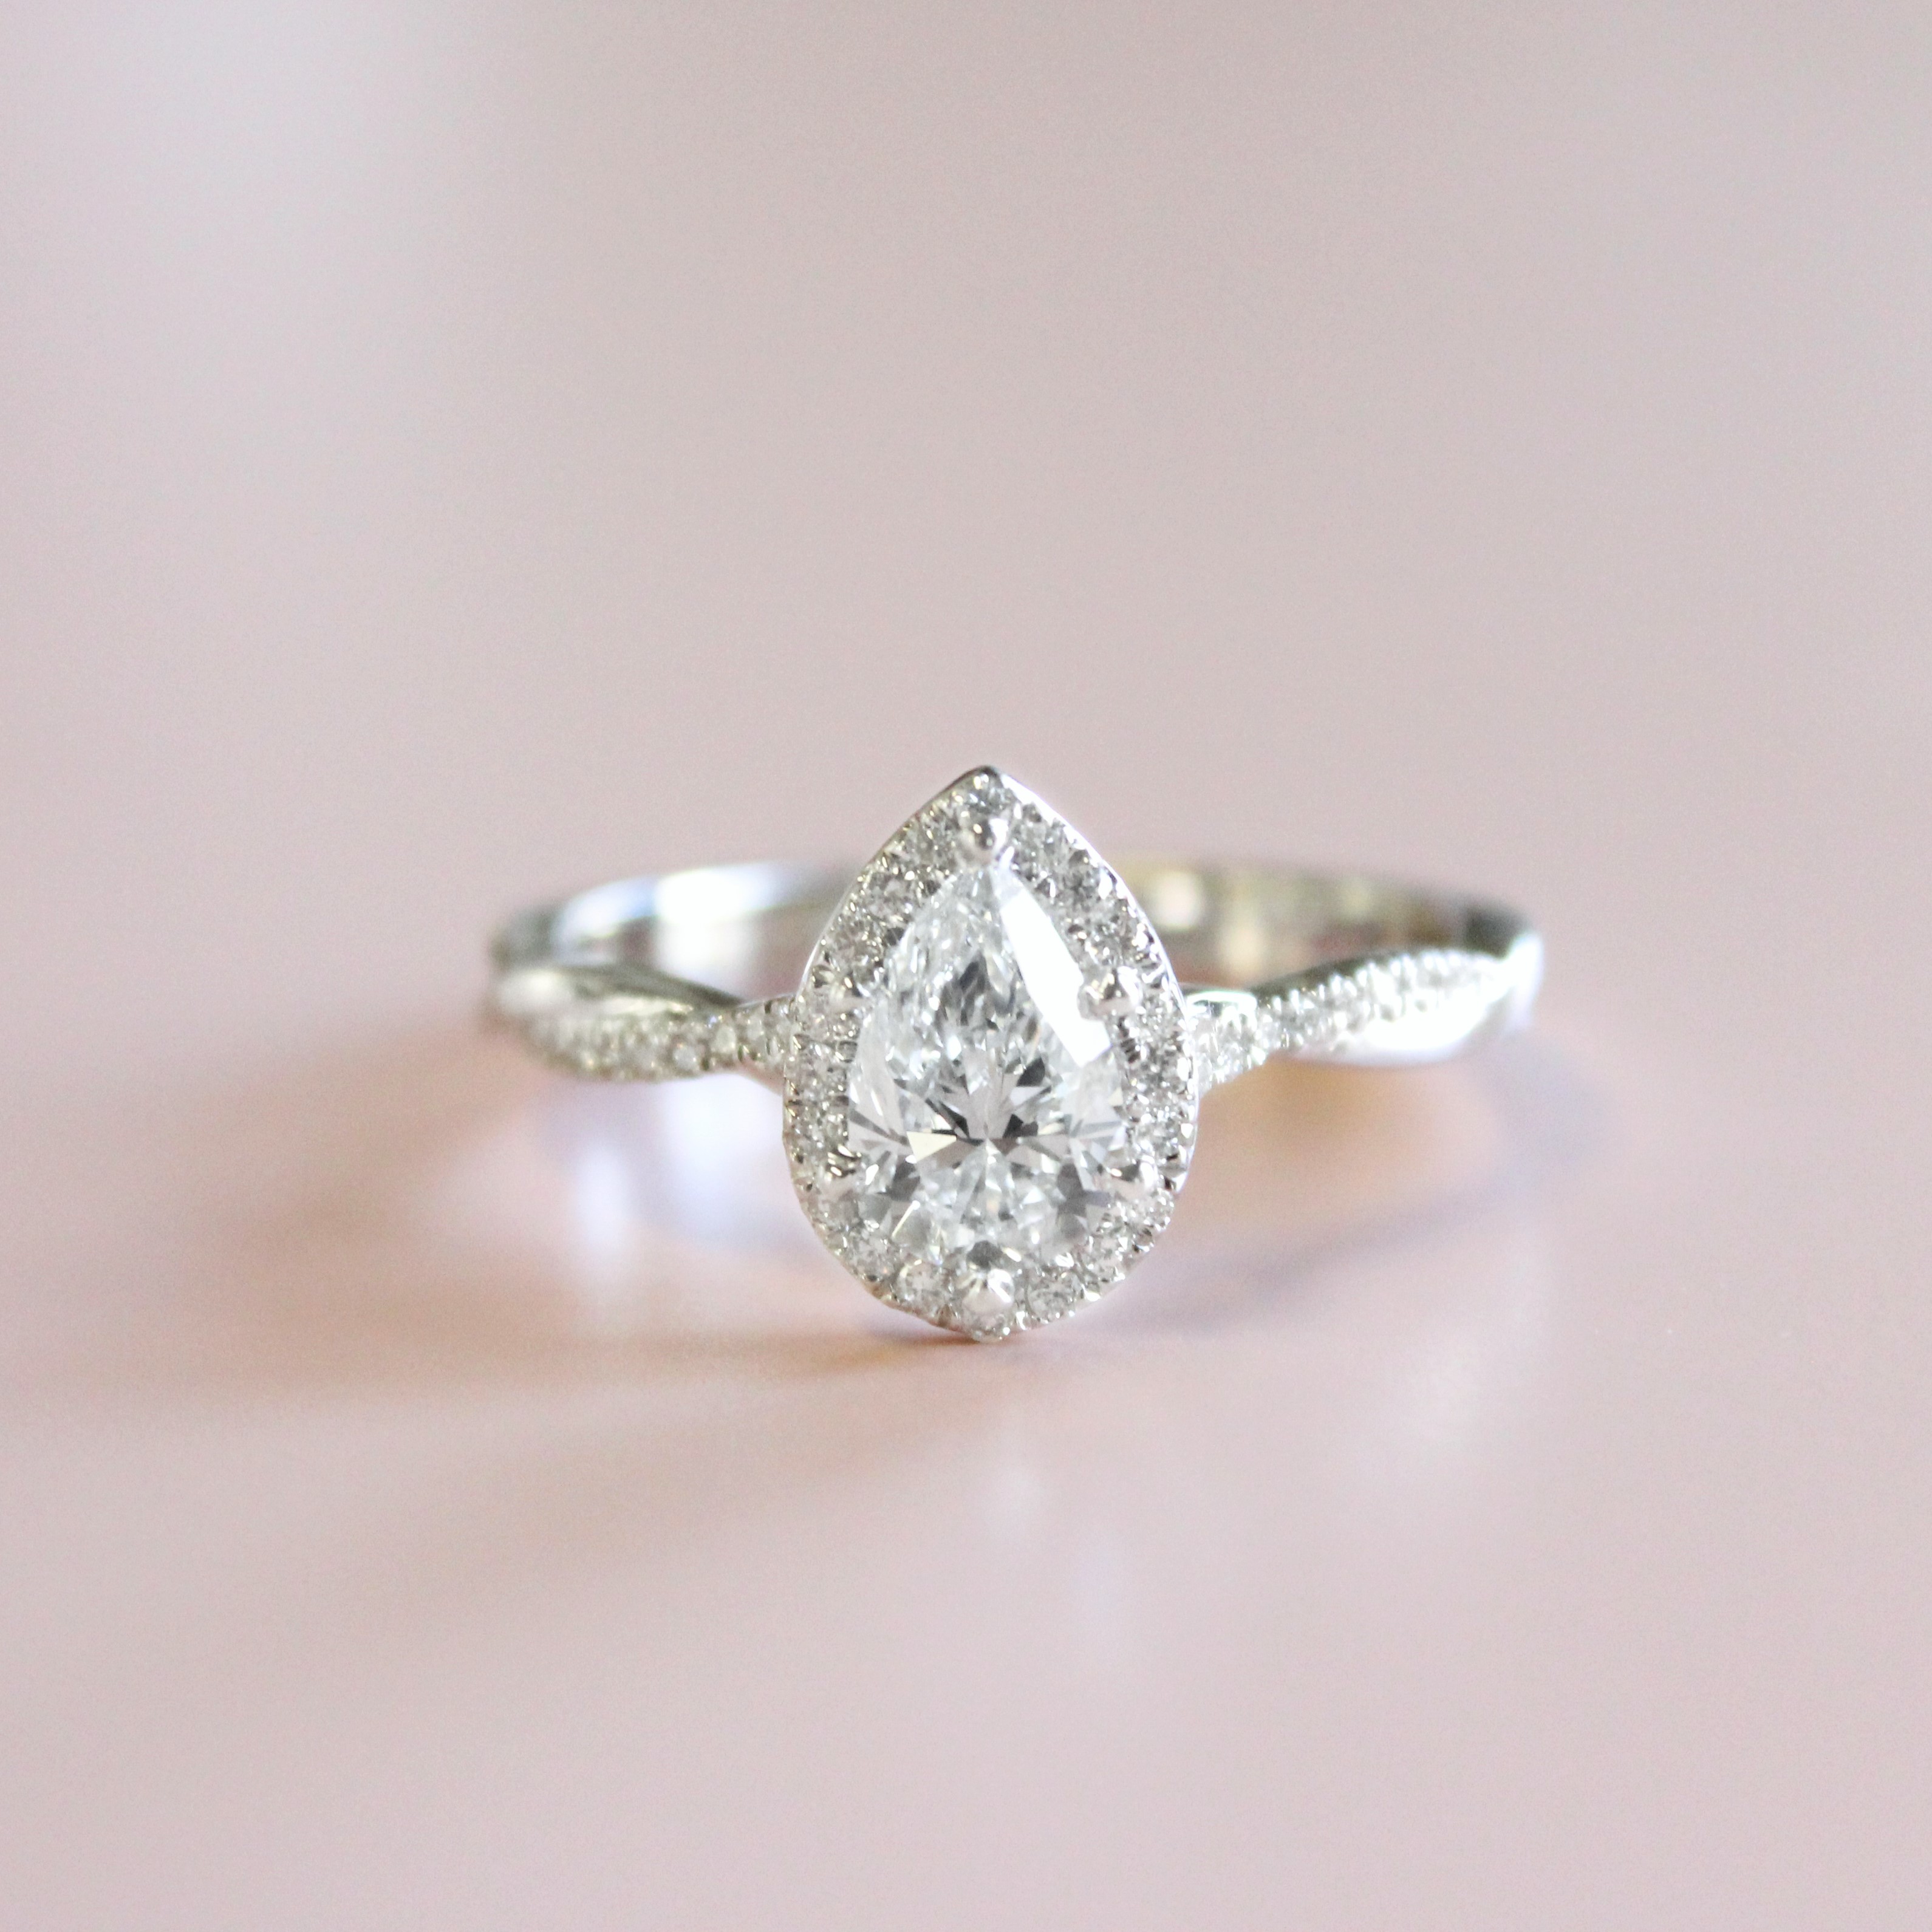 Most Popular Engagement Rings According to Instagram | Brilliant Earth